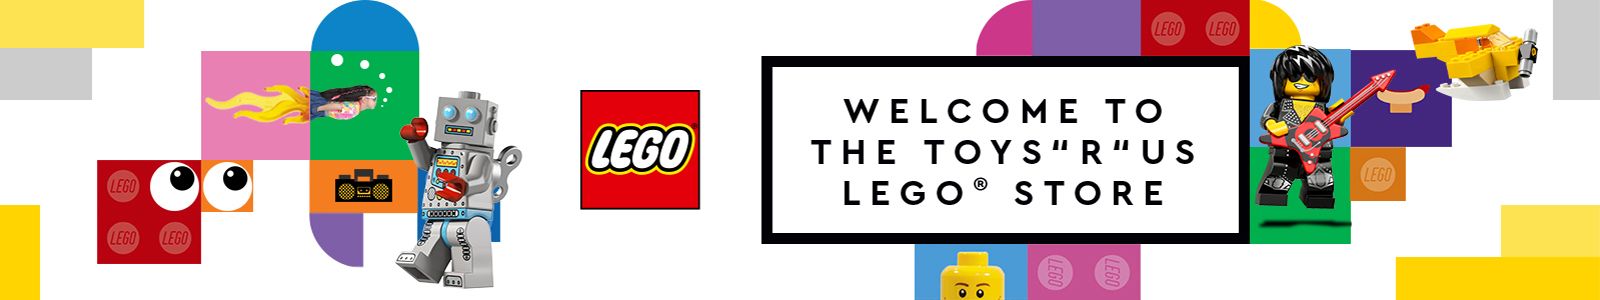 Welcome To The Toys "R" Us Lego Store